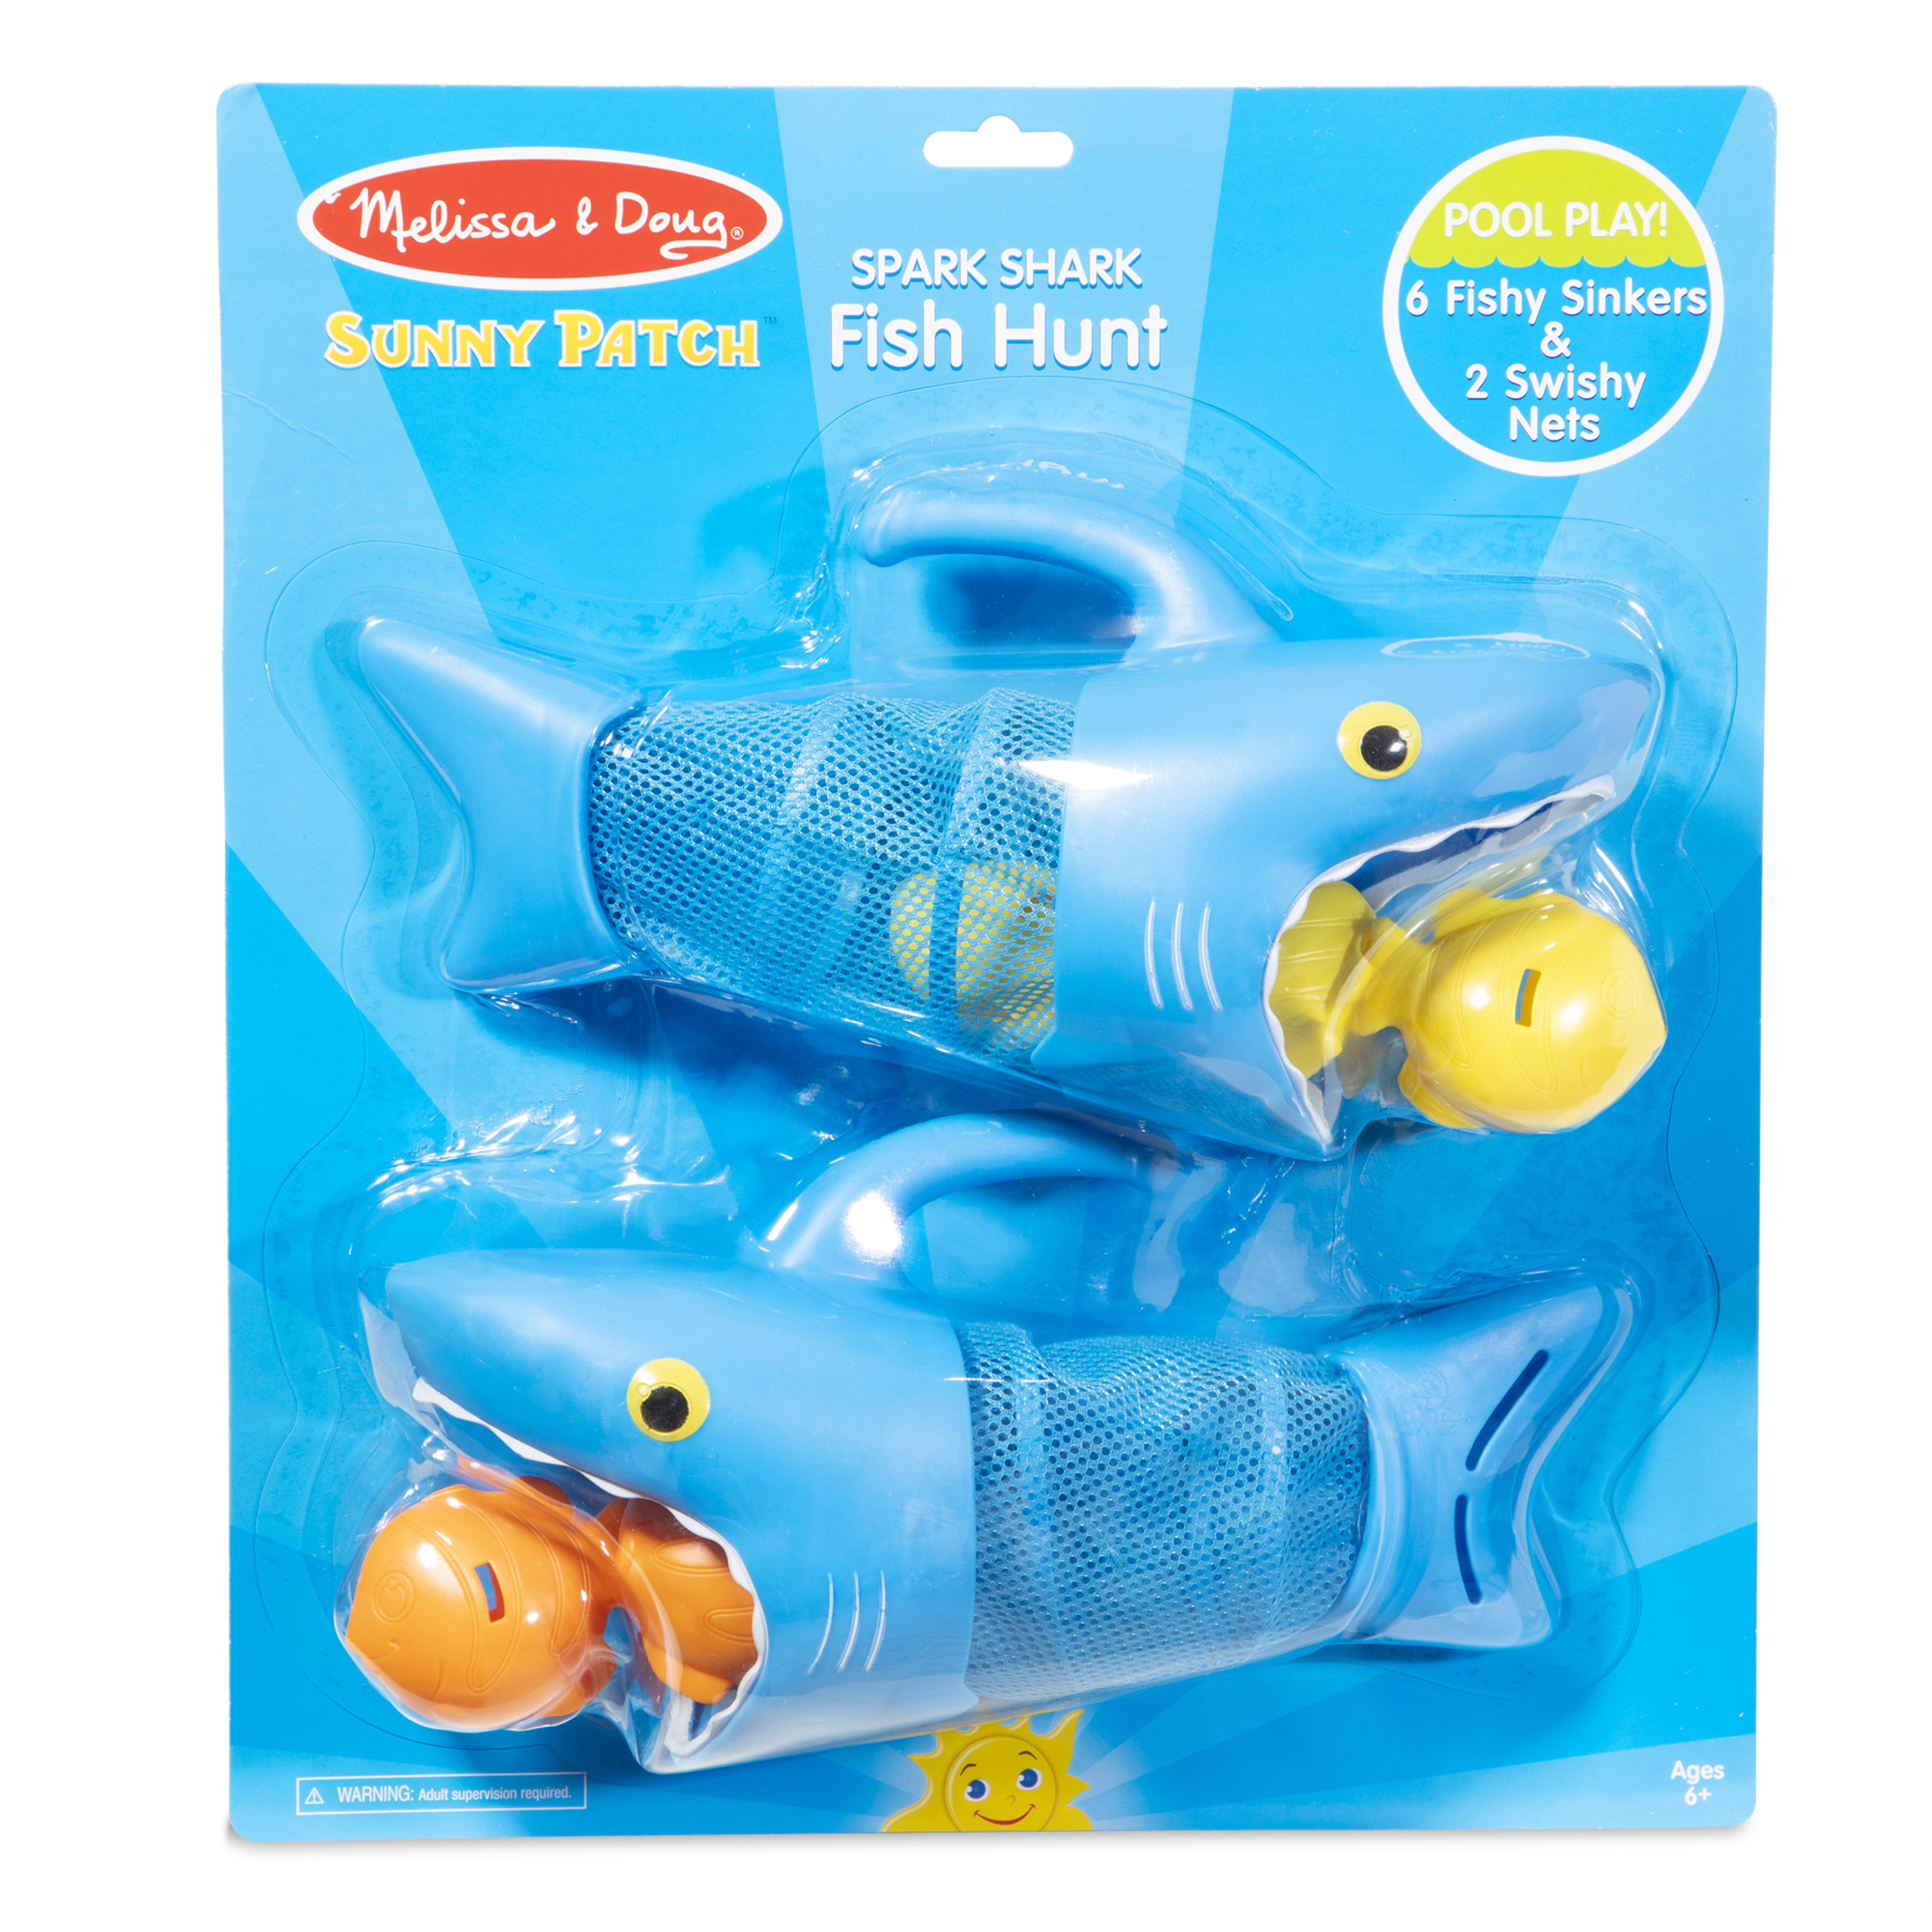 Melissa & Doug Sunny Patch Spark Shark Fish Hunt Pool Game With 2 Nets and 6 Fish to Catch - image 4 of 10